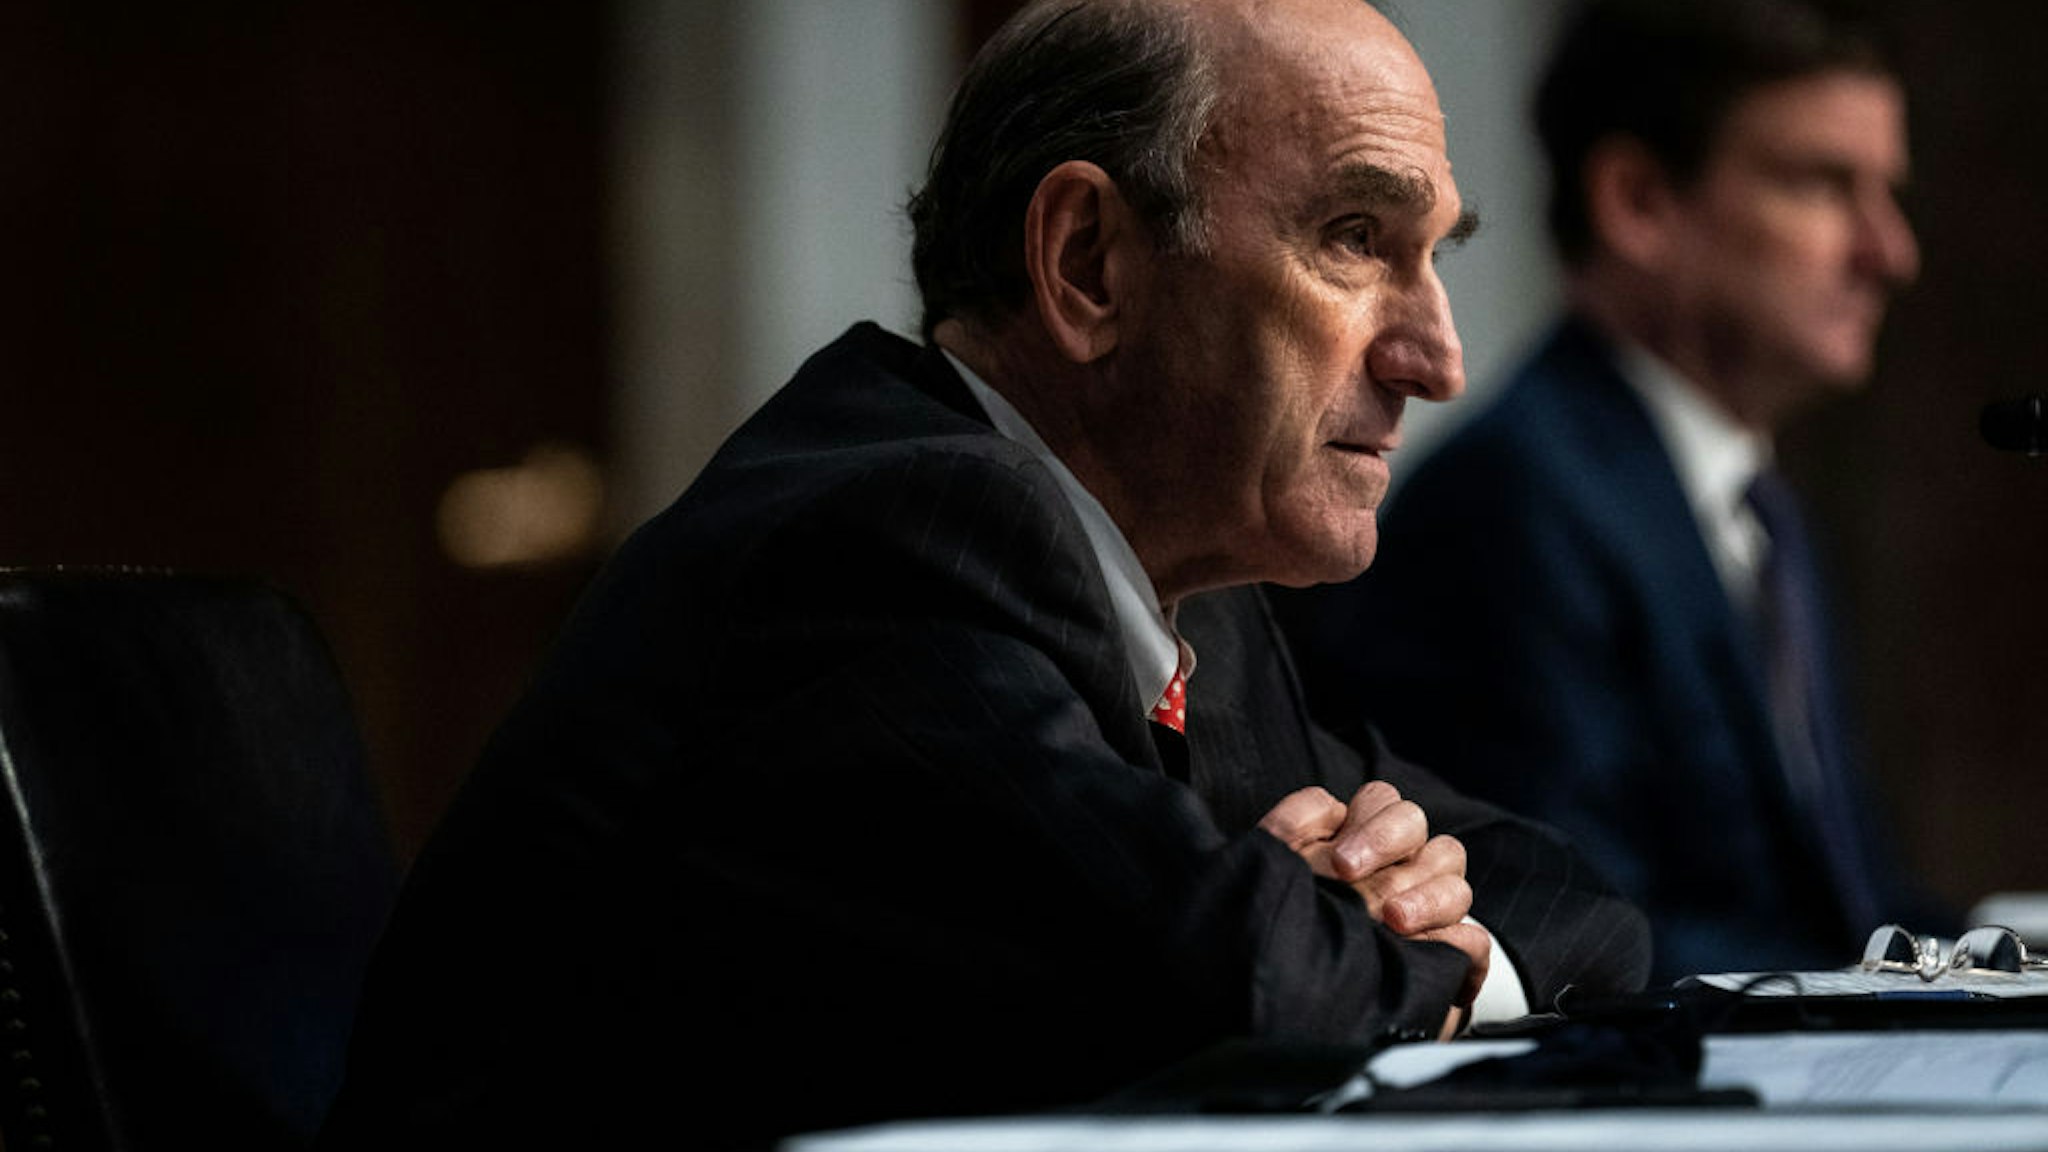 Elliot Abrams, special representative for Iran and Venezuela at the State Department, testifies during a Senate Committee on Foreign Relations hearing on US Policy in the Middle East on Capitol Hill on September 24, 2020 in Washington, DC.